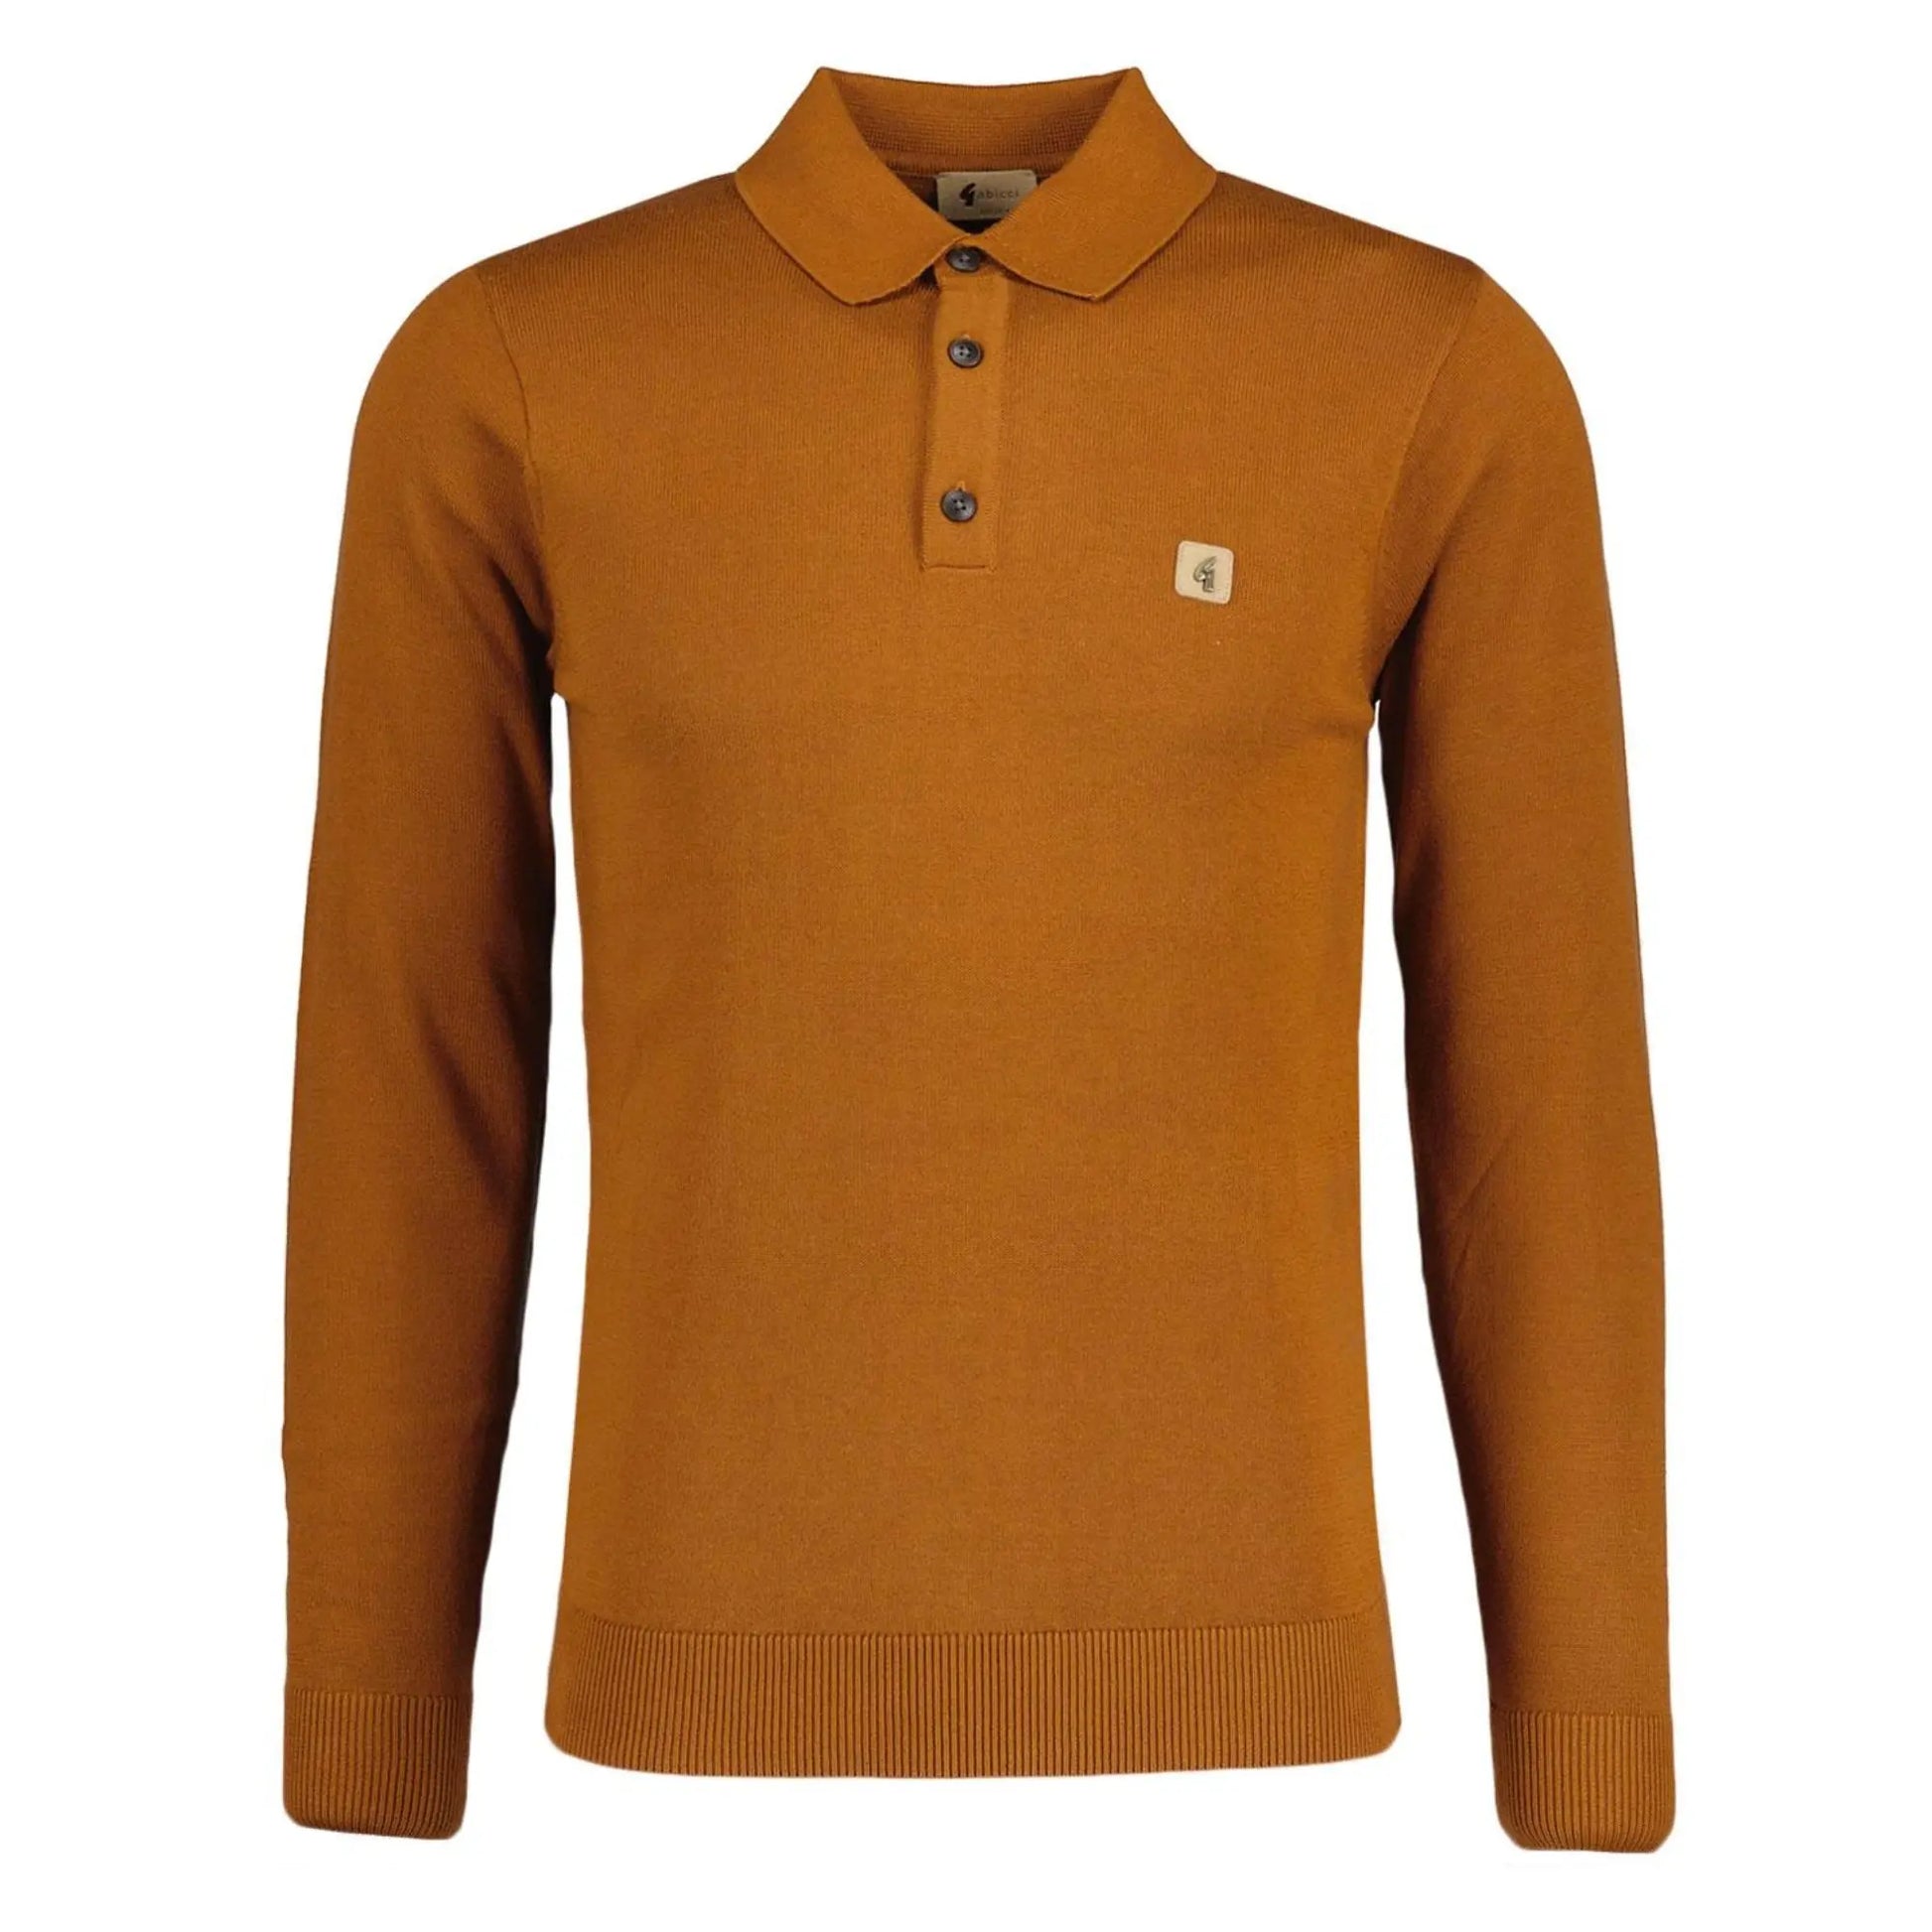 Buy Gabicci Vintage Francesco Long Sleeve Polo - Toffee Brown | Long-Sleeved Polo Shirtss at Woven Durham